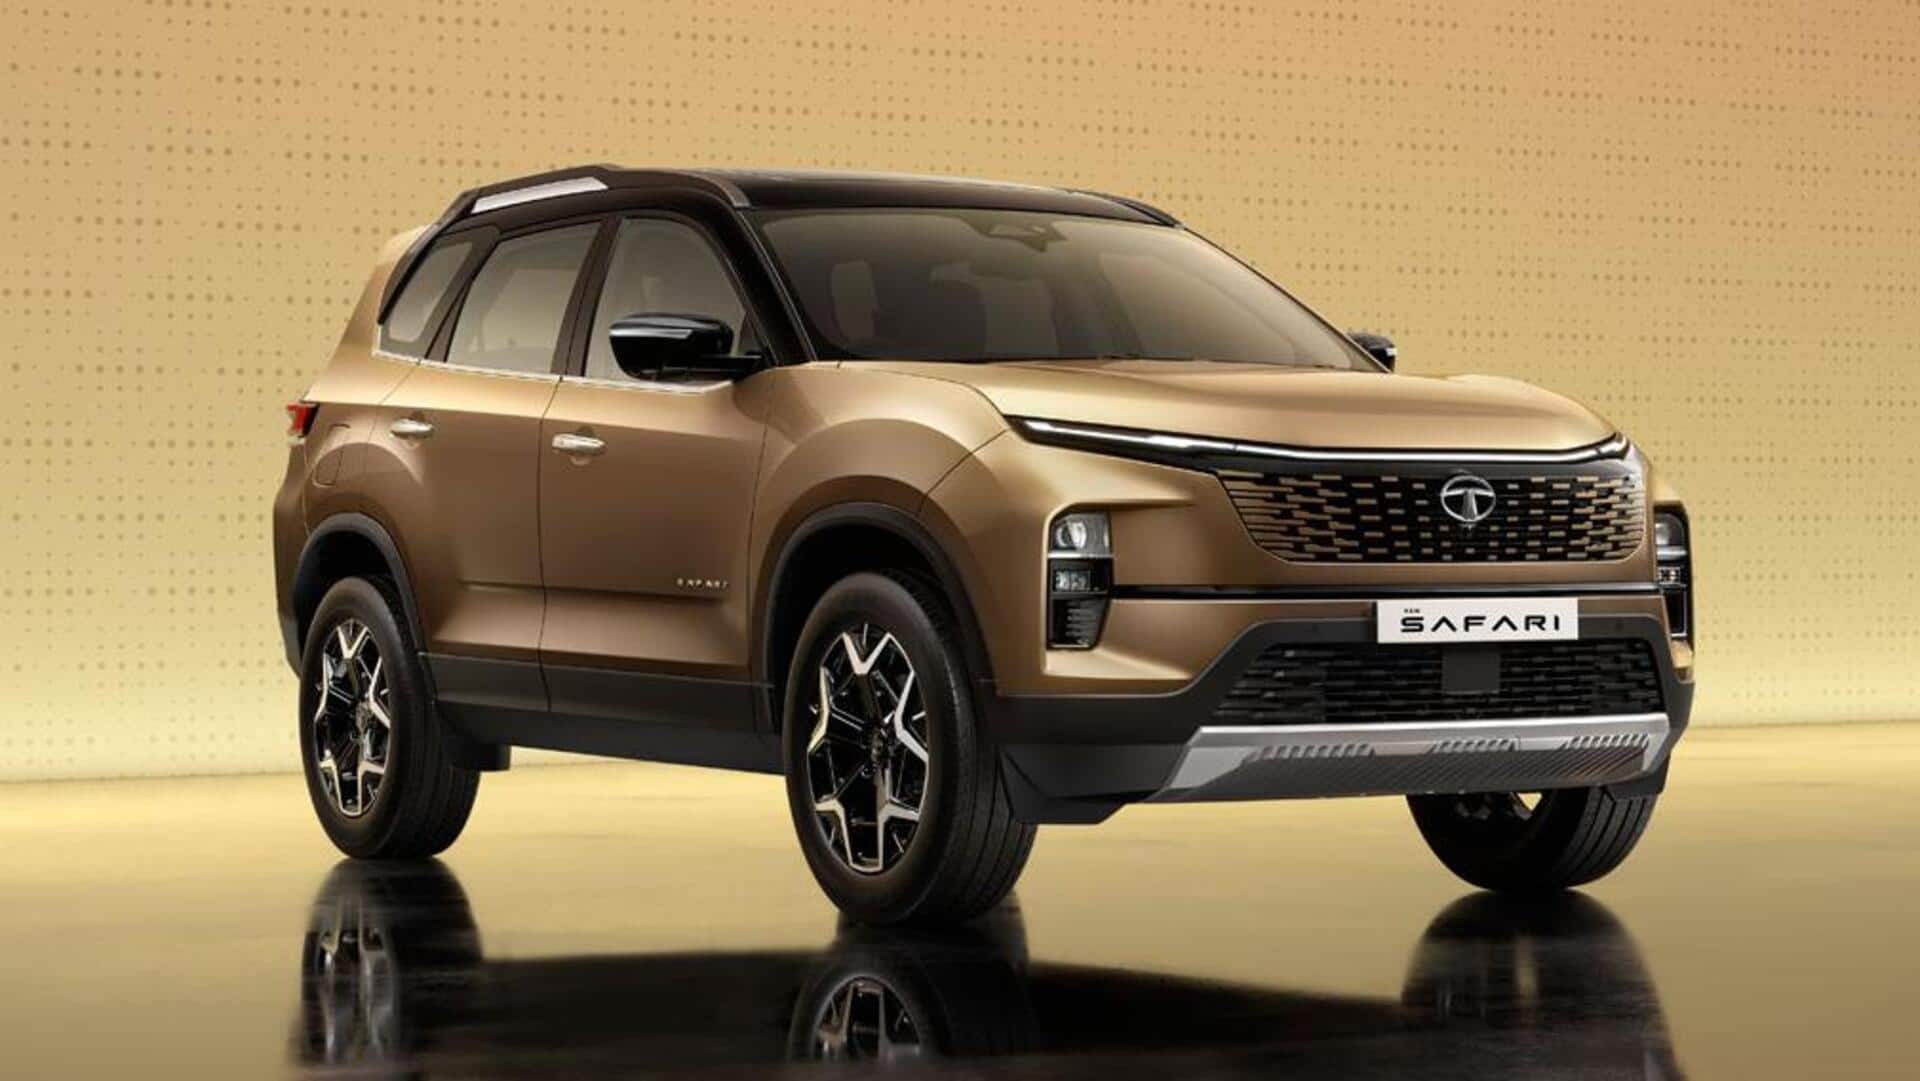 Tata Safari's waiting period now extends to 6 weeks